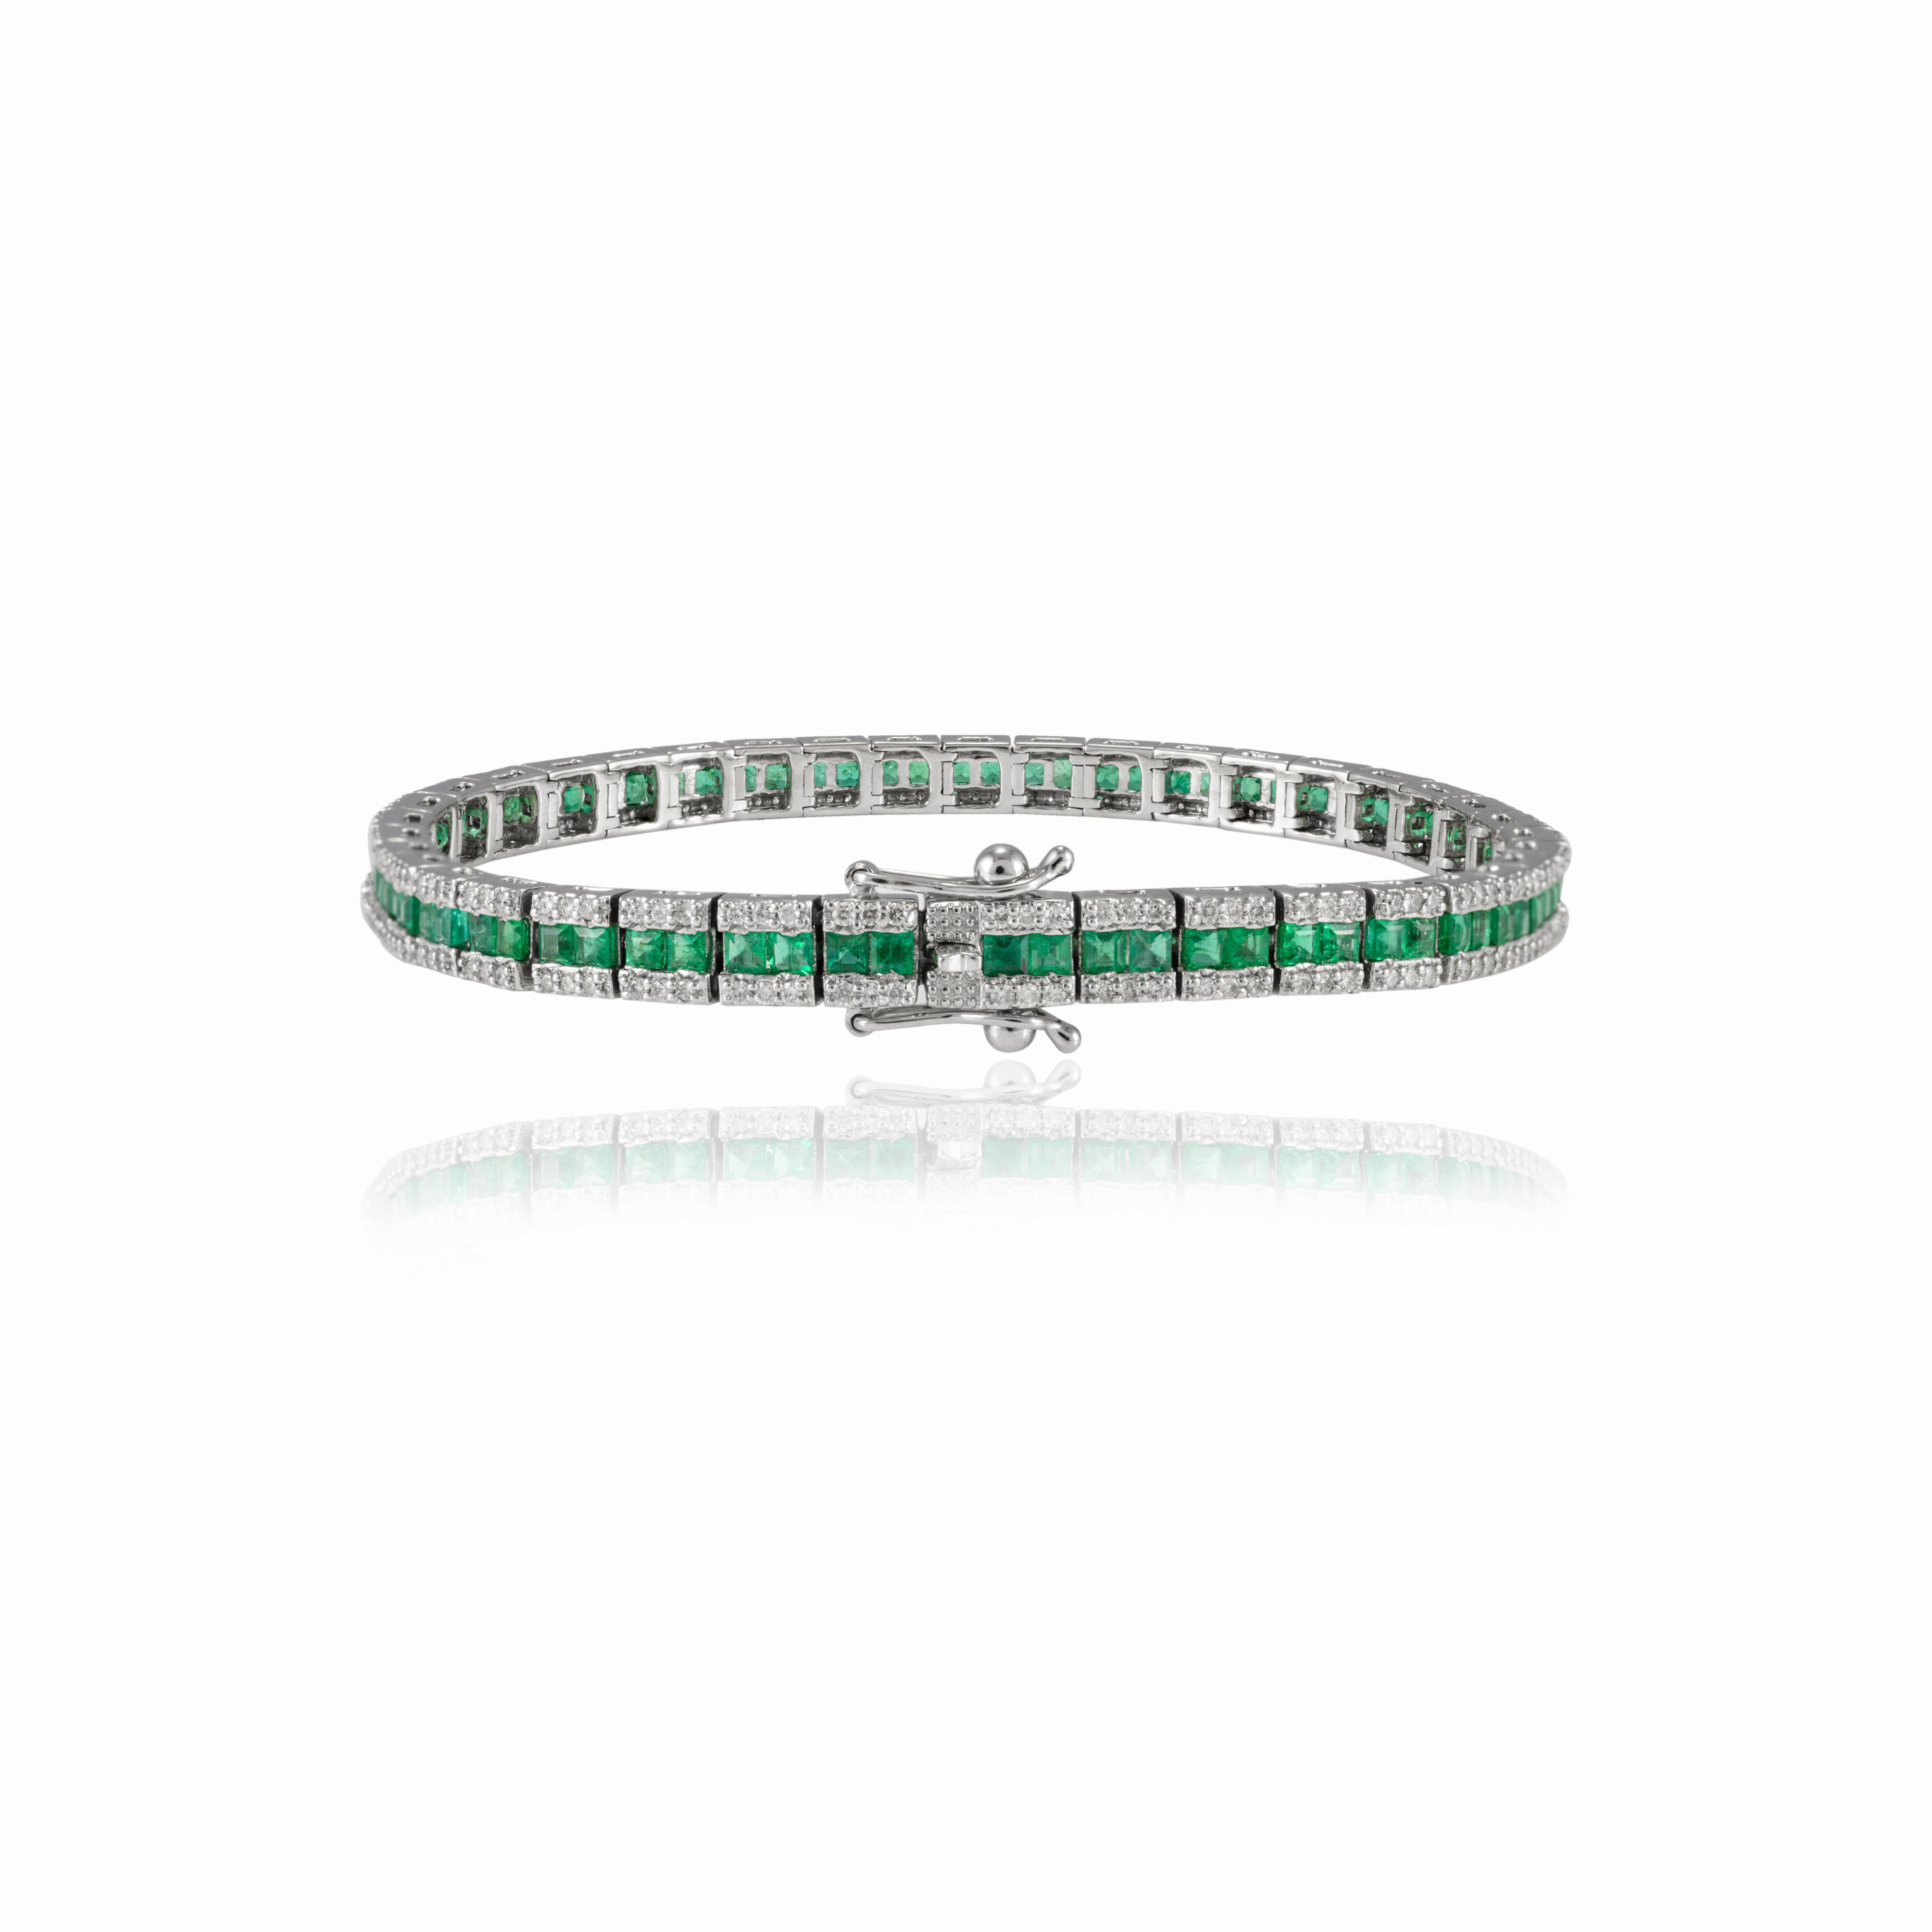 Art Deco French Cut Certified Emerald Diamond Tennis Bracelet in 18k Solid White Gold For Sale